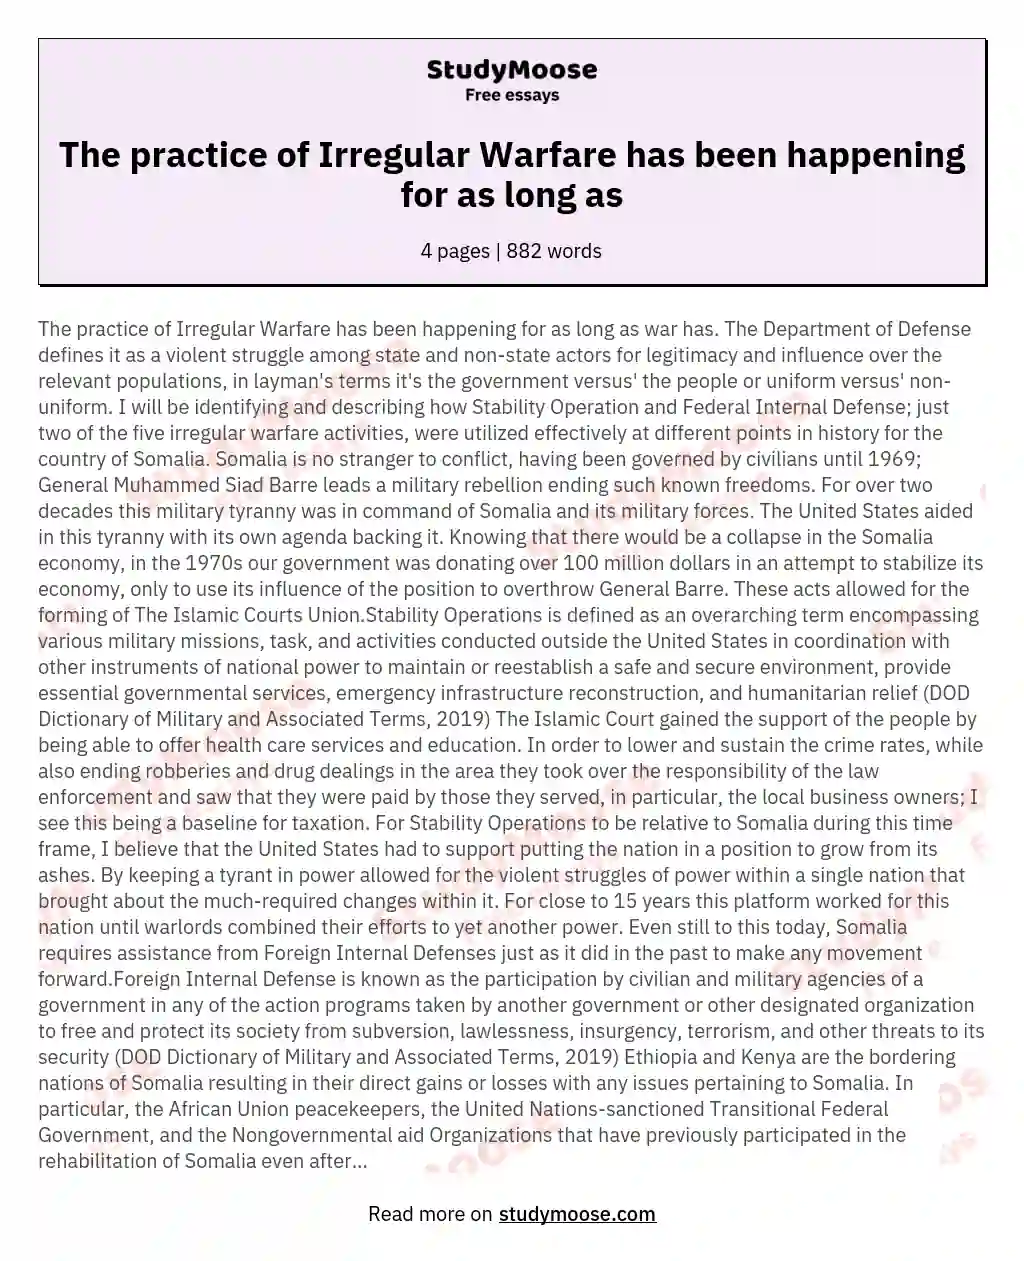 The practice of Irregular Warfare has been happening for as long as essay